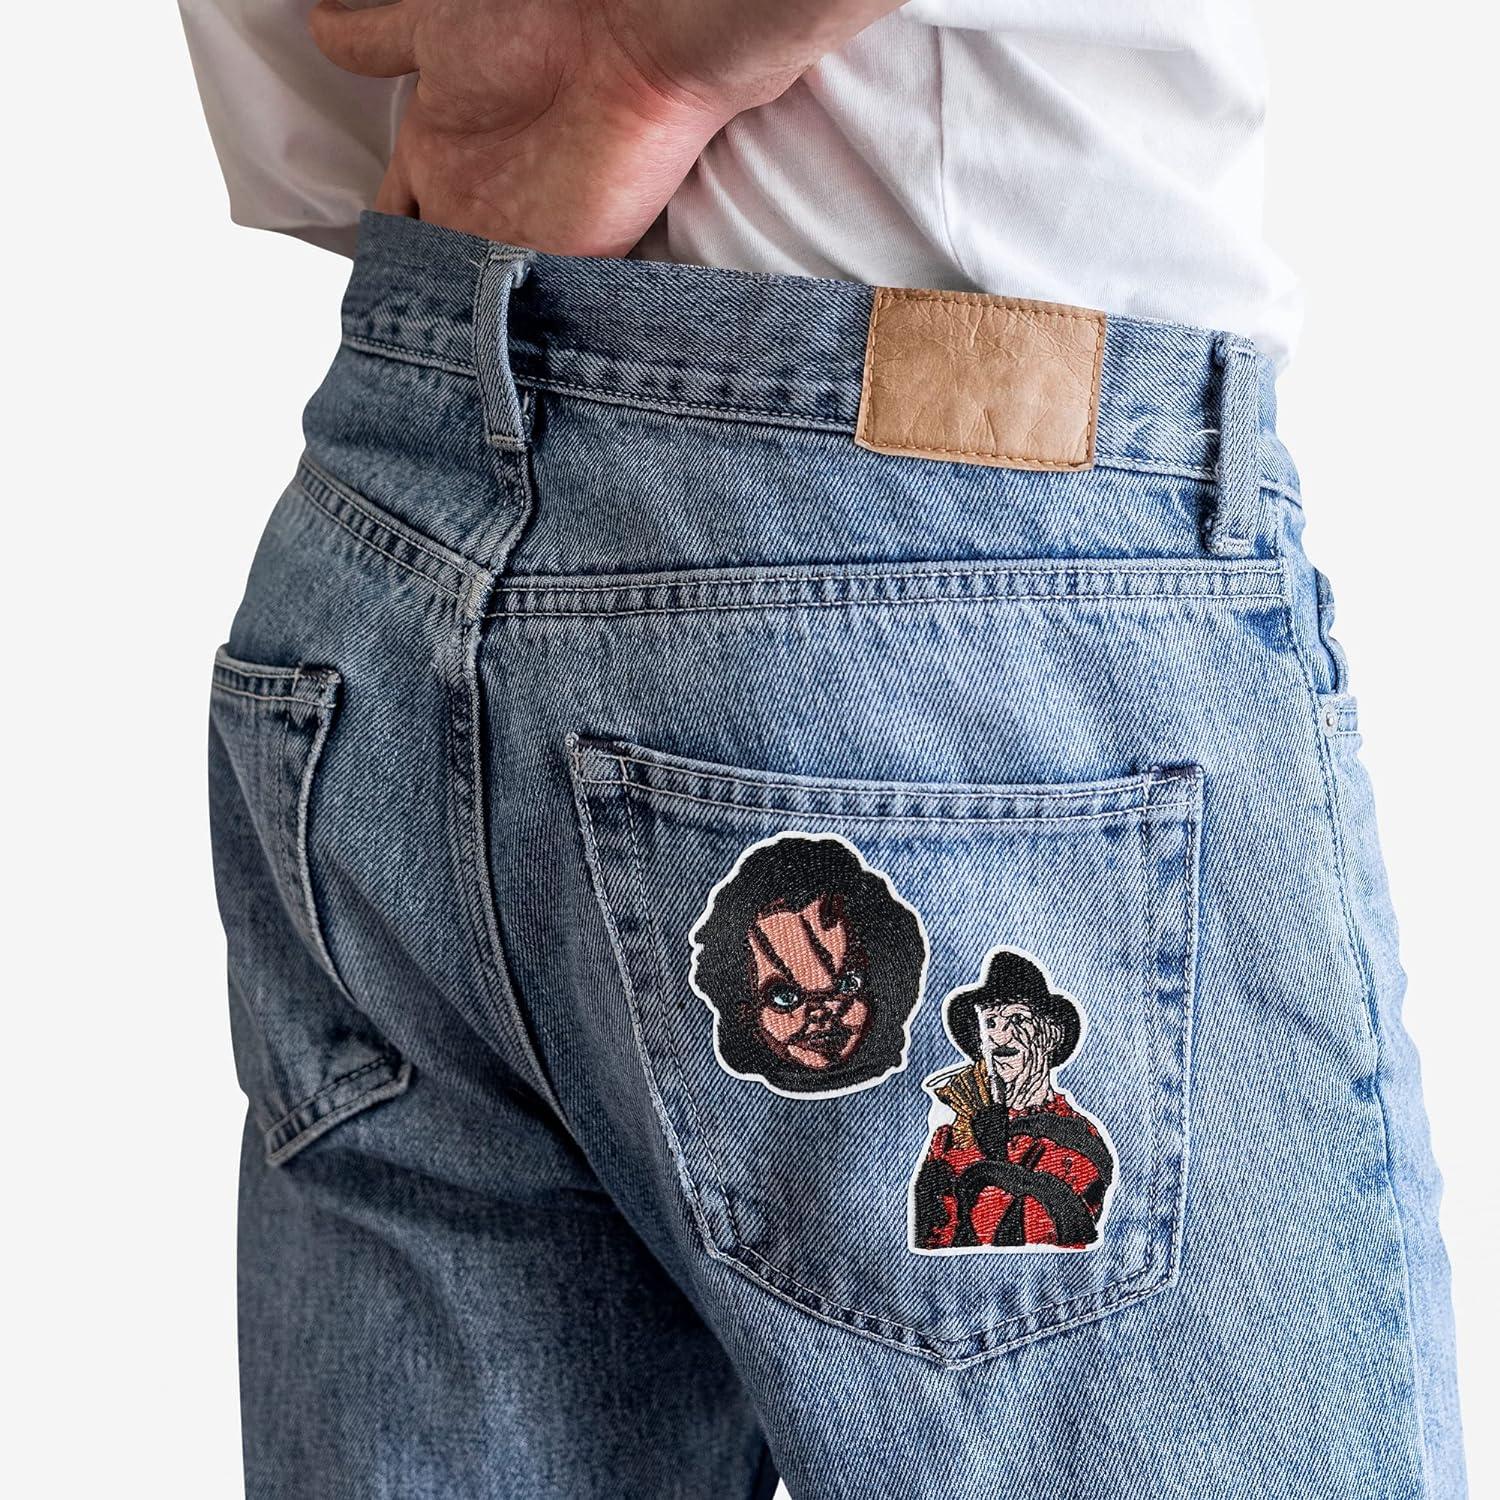 How to Attach Patches to Clothes: Jackets, Shirts, Hats, Jeans